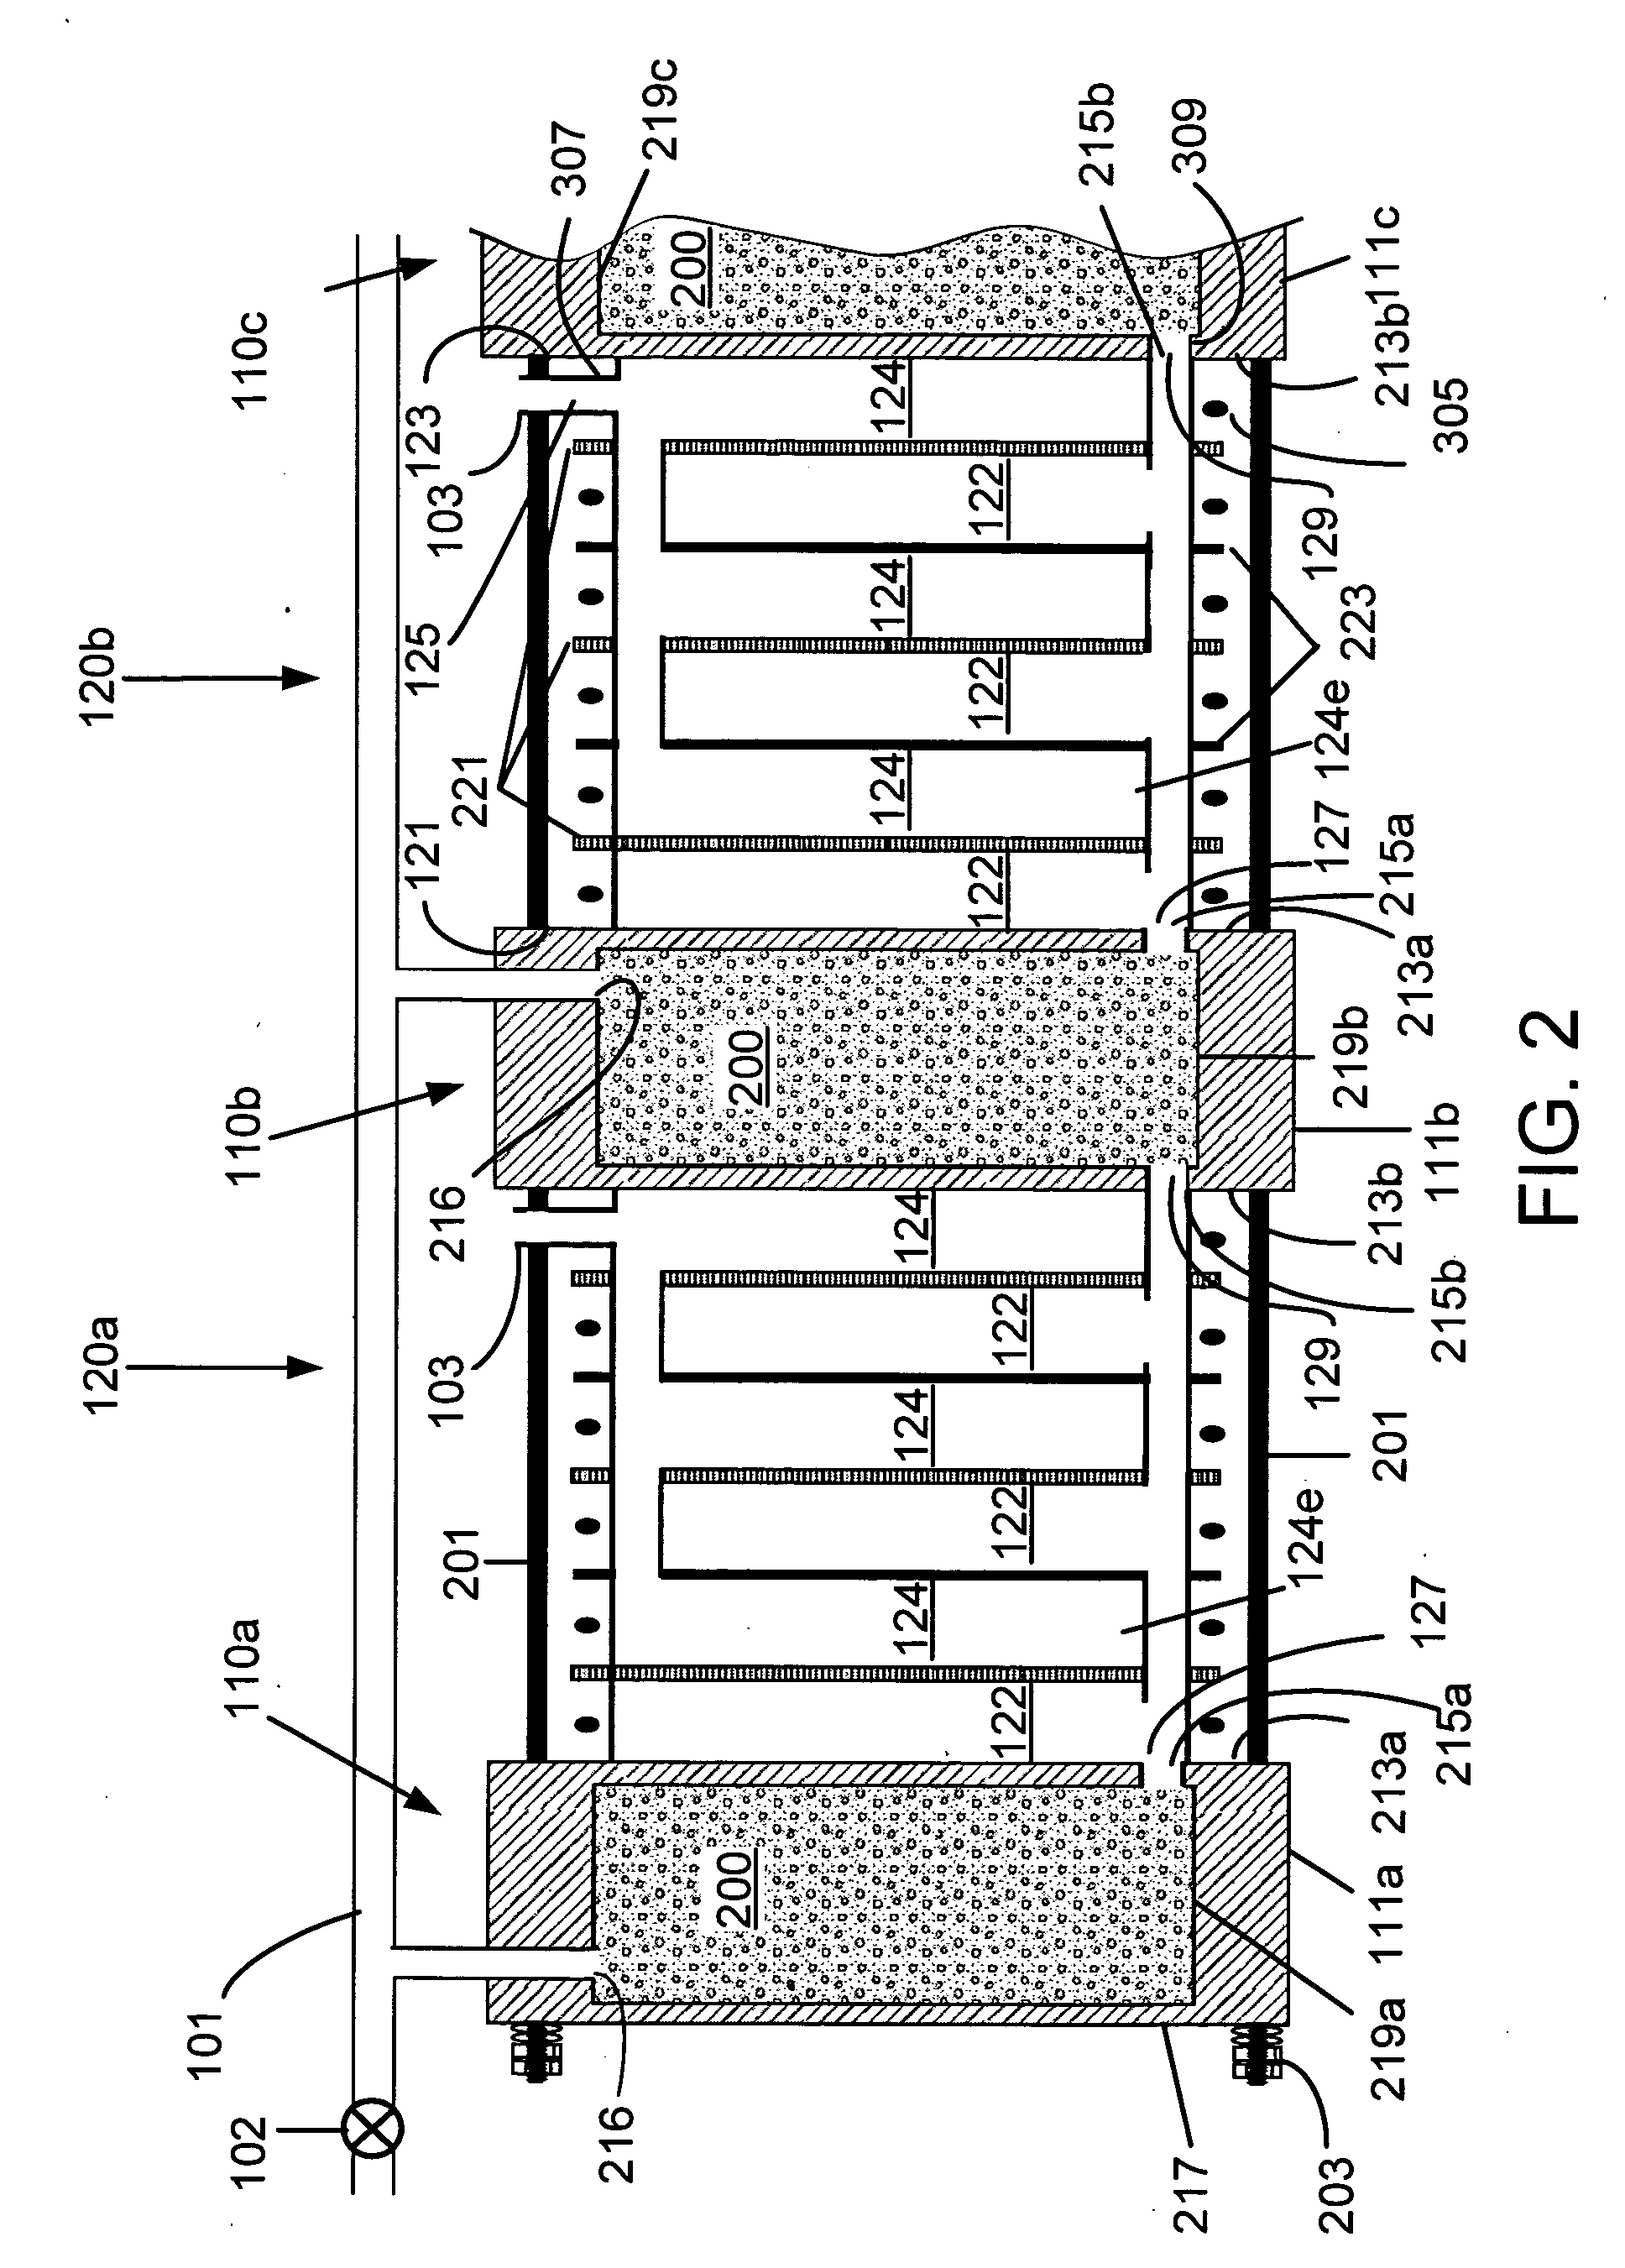 Hydrogen storage and integrated fuel cell assembly